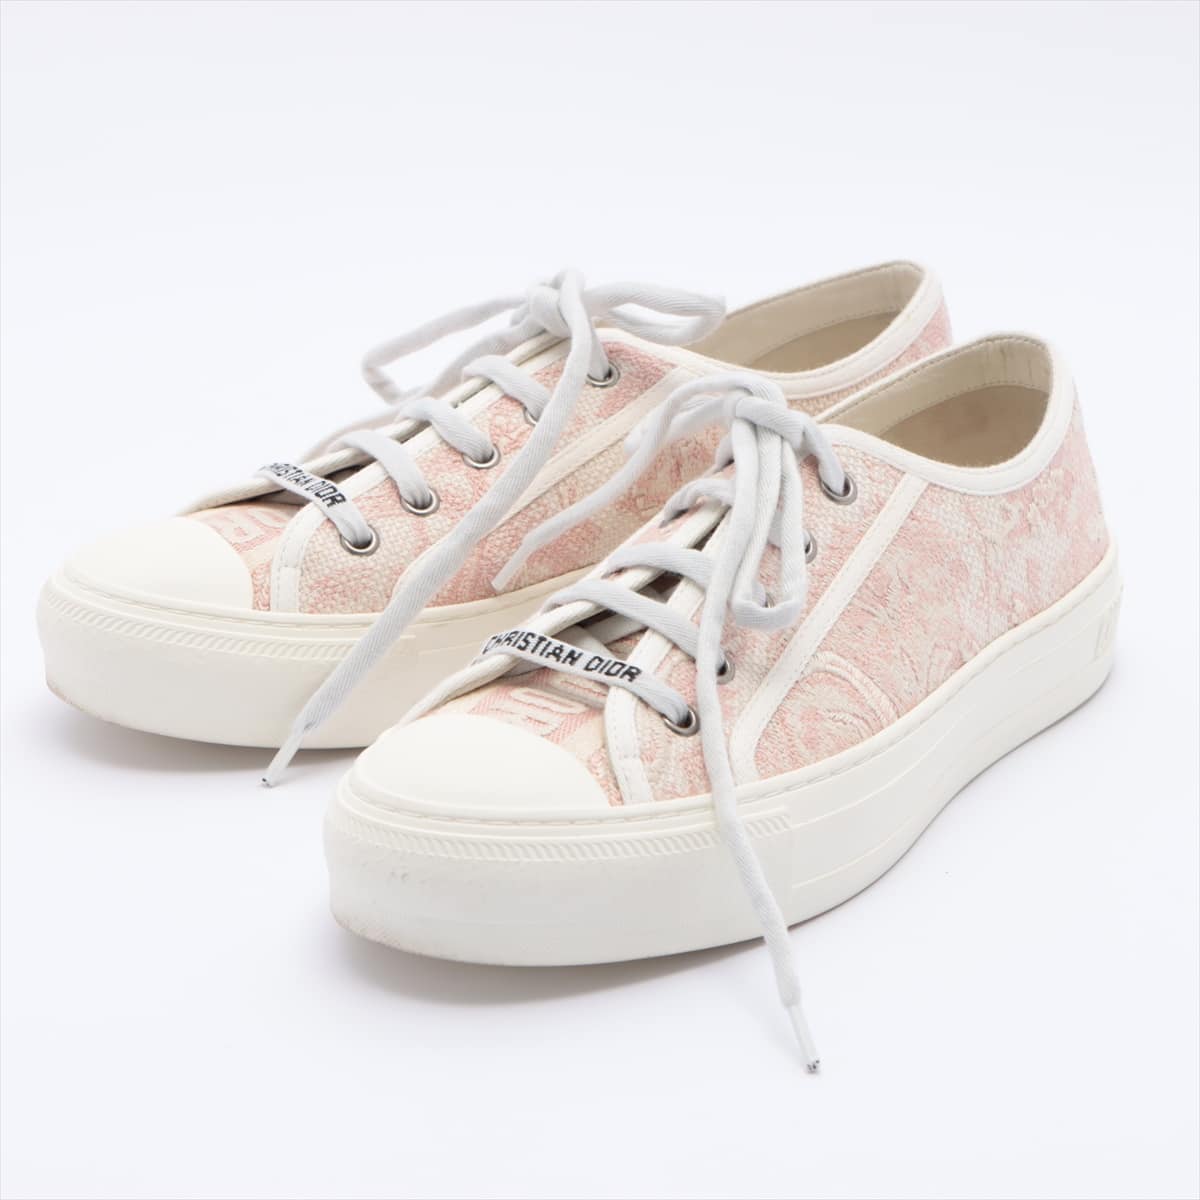 Christian Dior canvas Sneakers 37 Ladies' Pink Embroidery